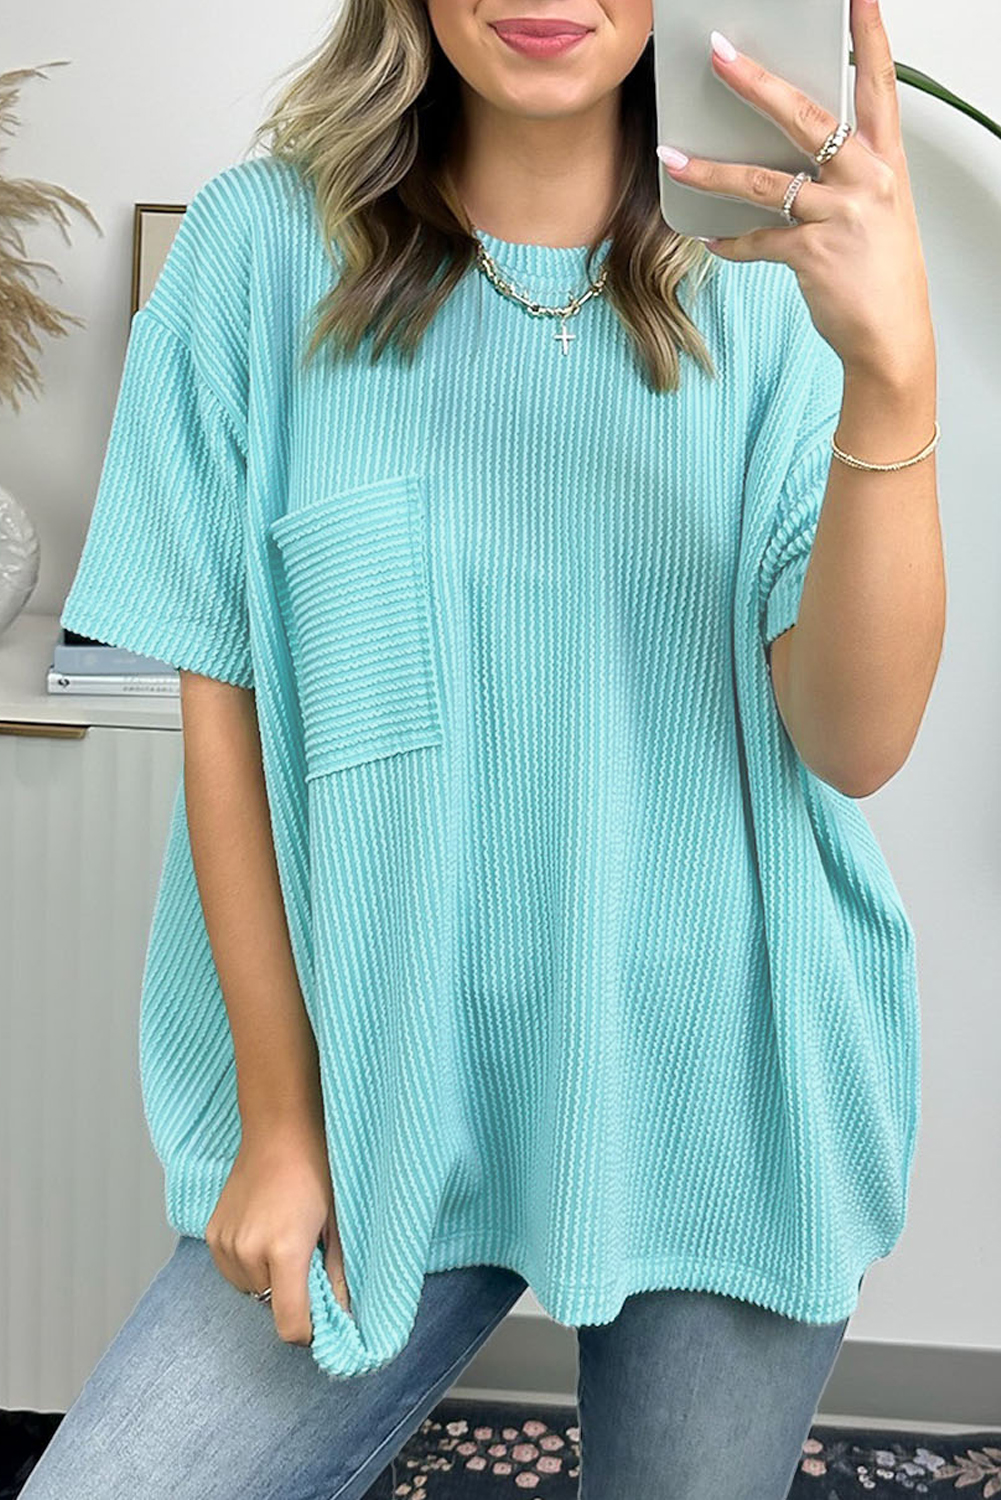 Shewin Wholesale WESTERN Turquoise Ribbed Knit Pocketed Loose Fit Crew Neck T Shirt